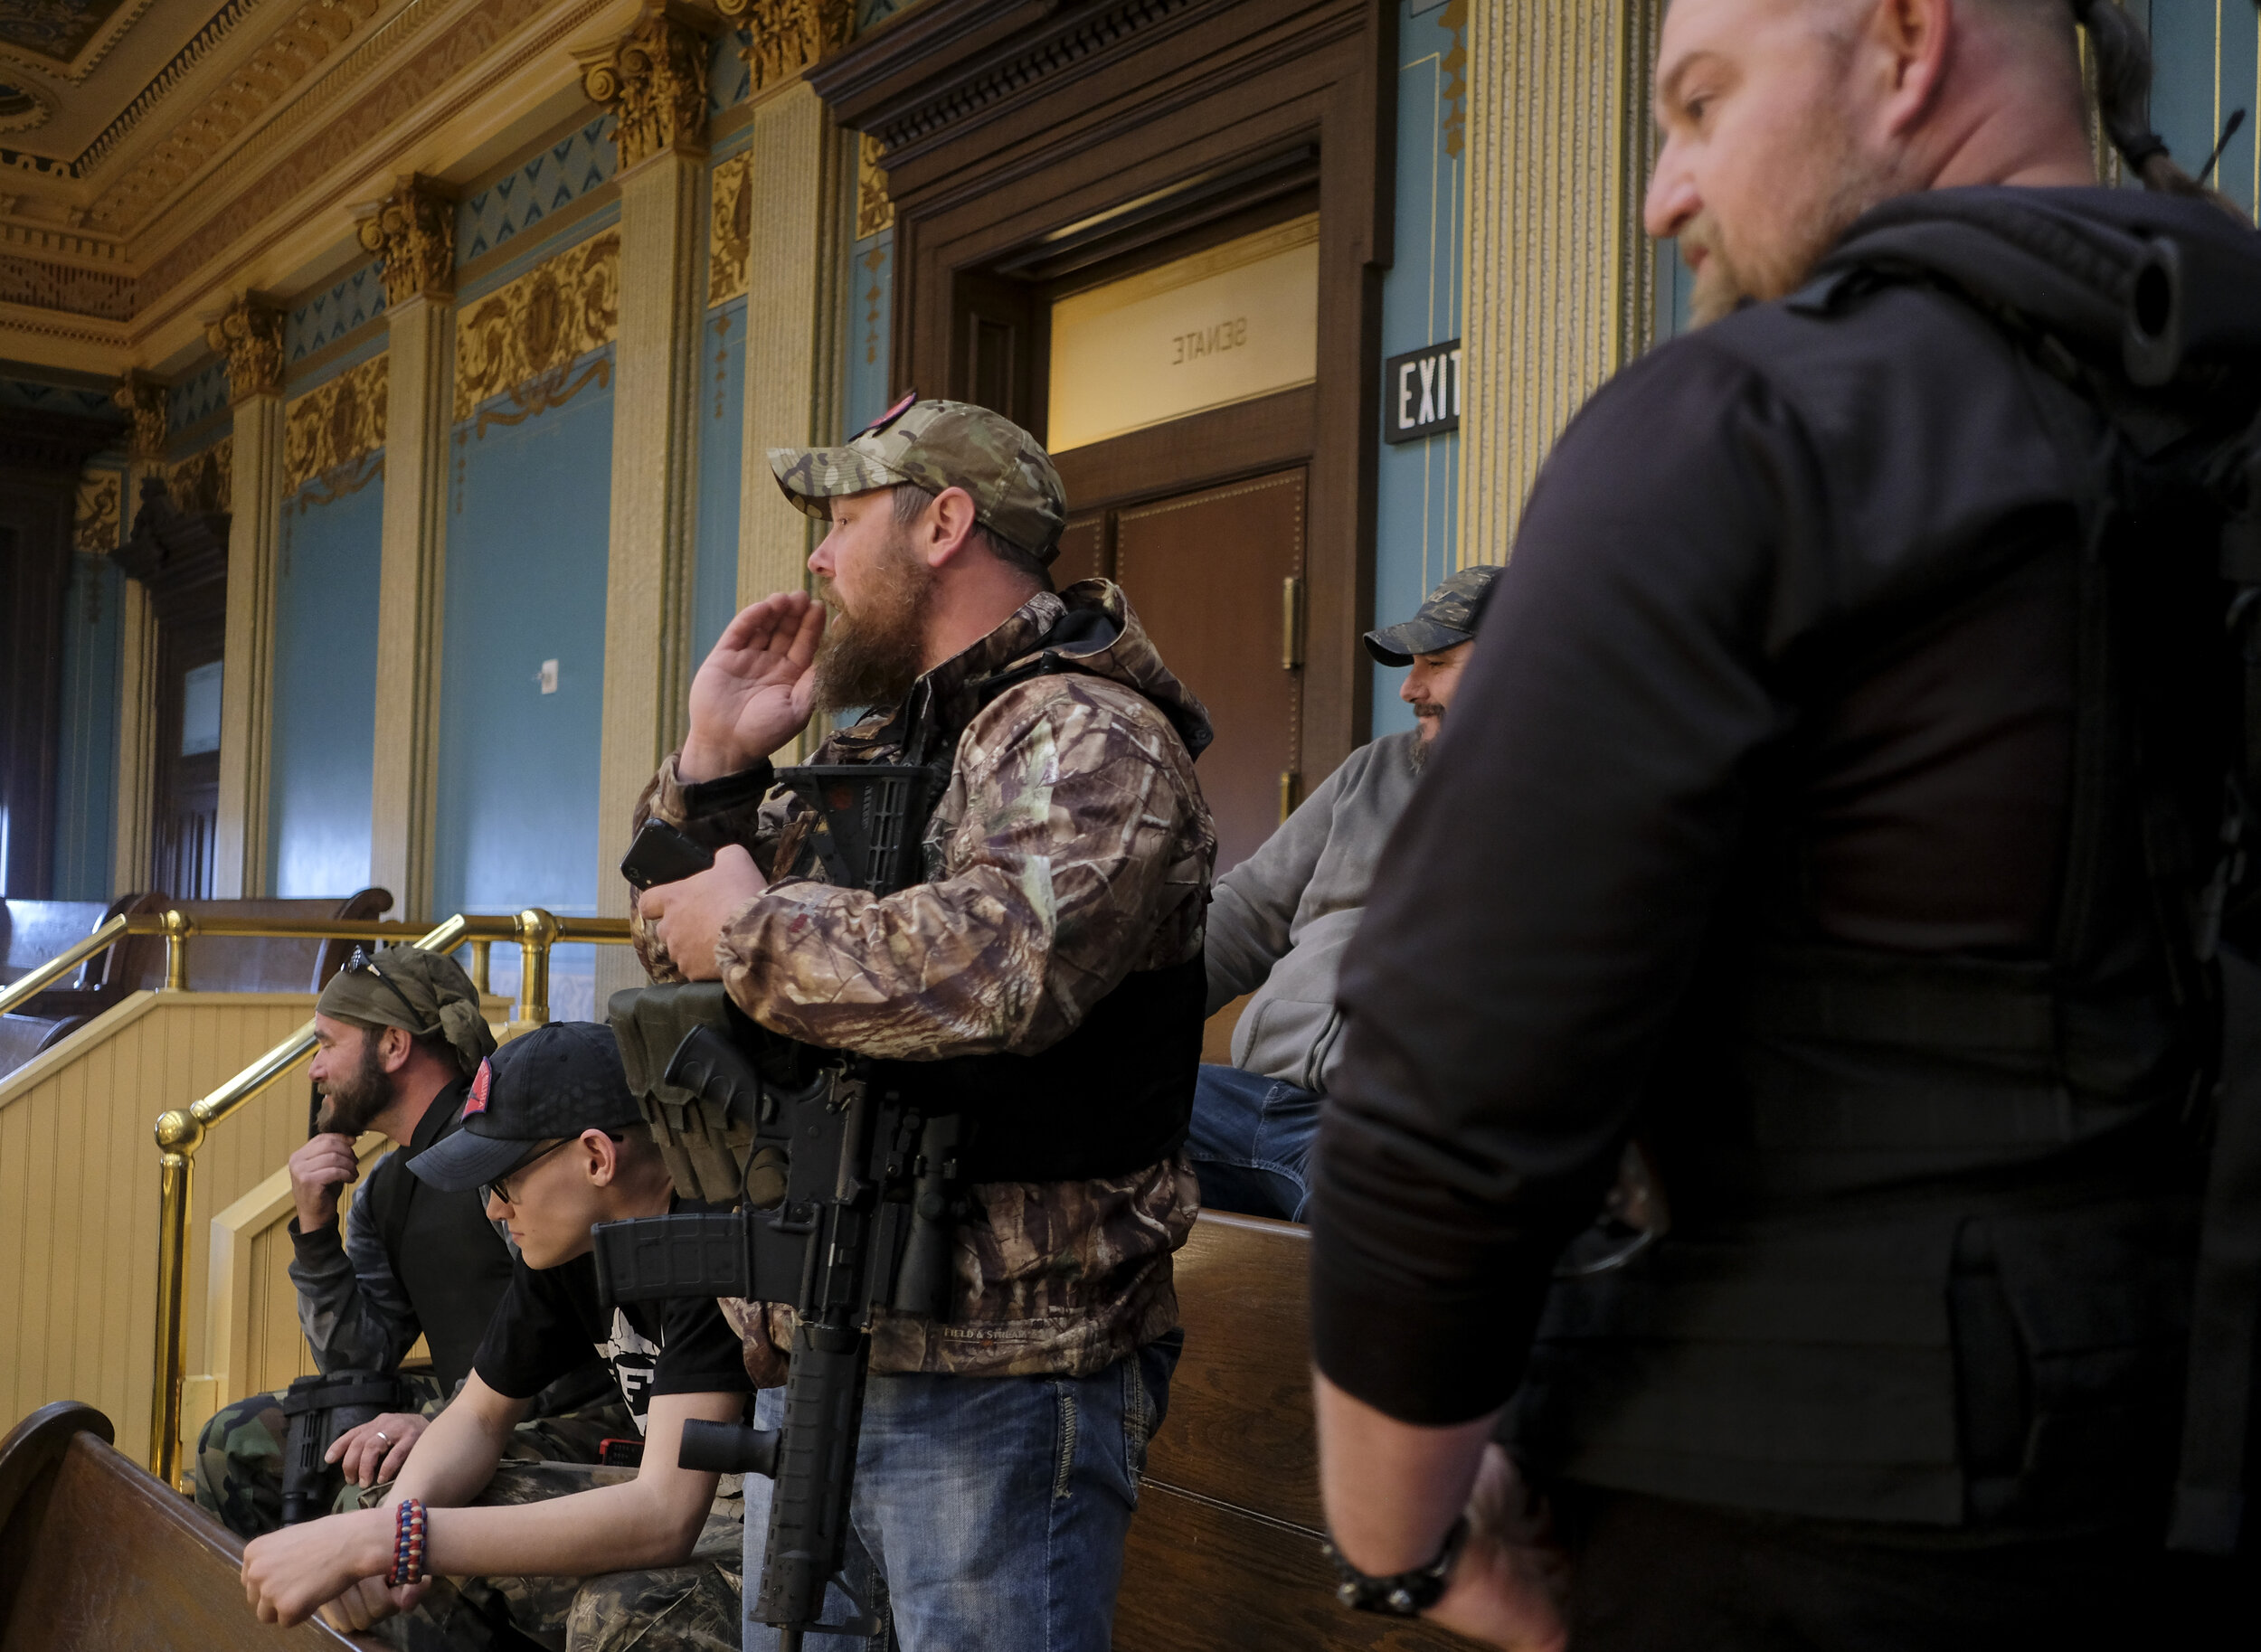  A milita member shouts “You just remember you work for us! Enjoy your paycheck while you still get it!” at Michigan senate members during a senate session at the Capitol Building in Lansing, Michigan  on Thursday, April 30. Protesters, some armed, h